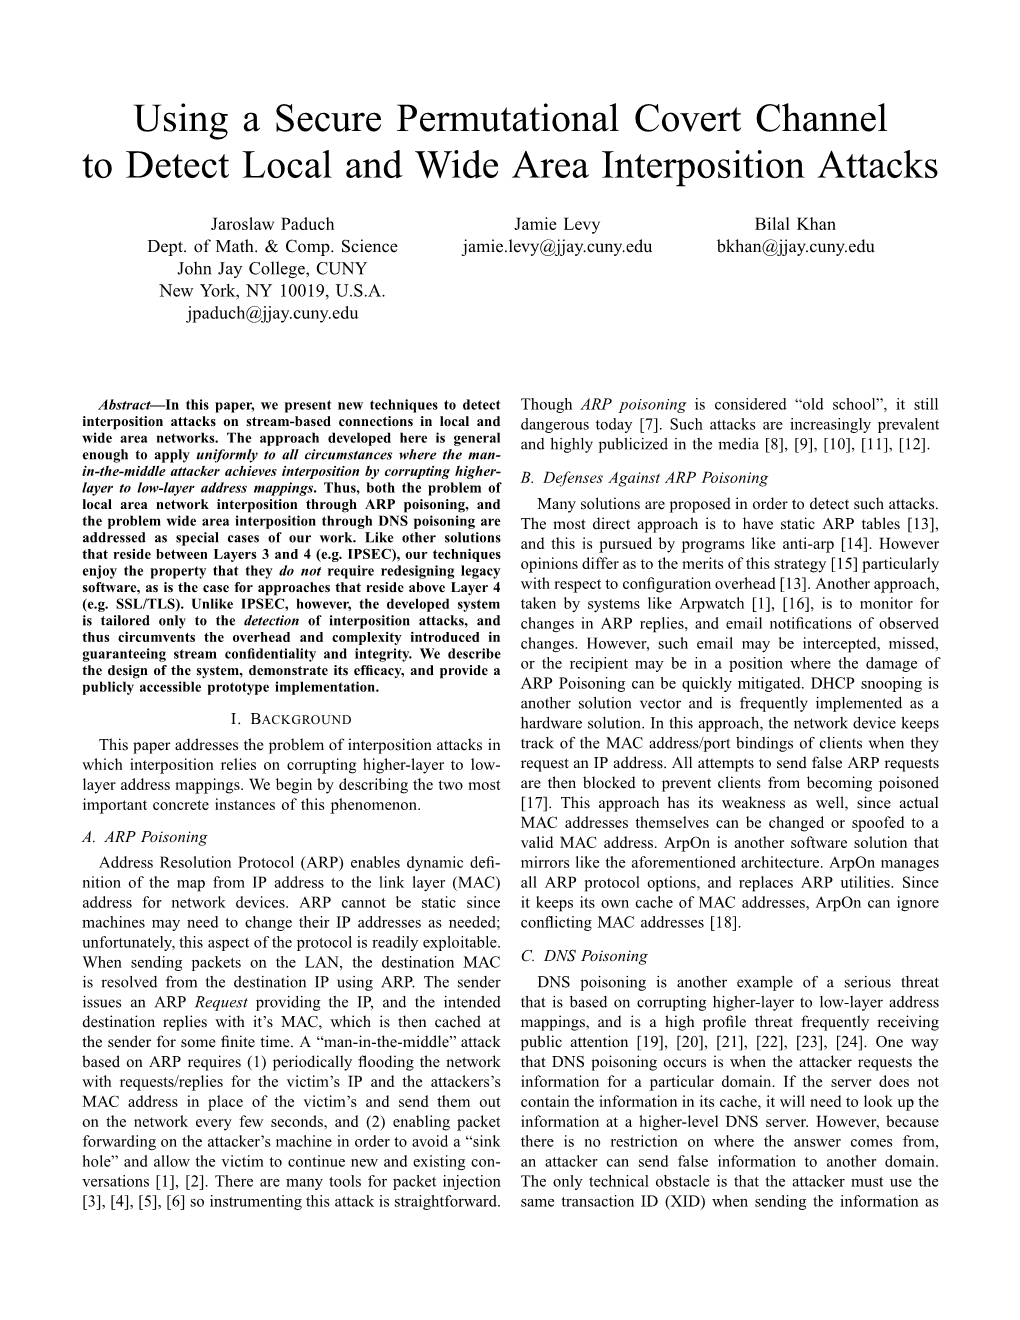 Using Secure Covert Channels to Detect Interposition Attacks